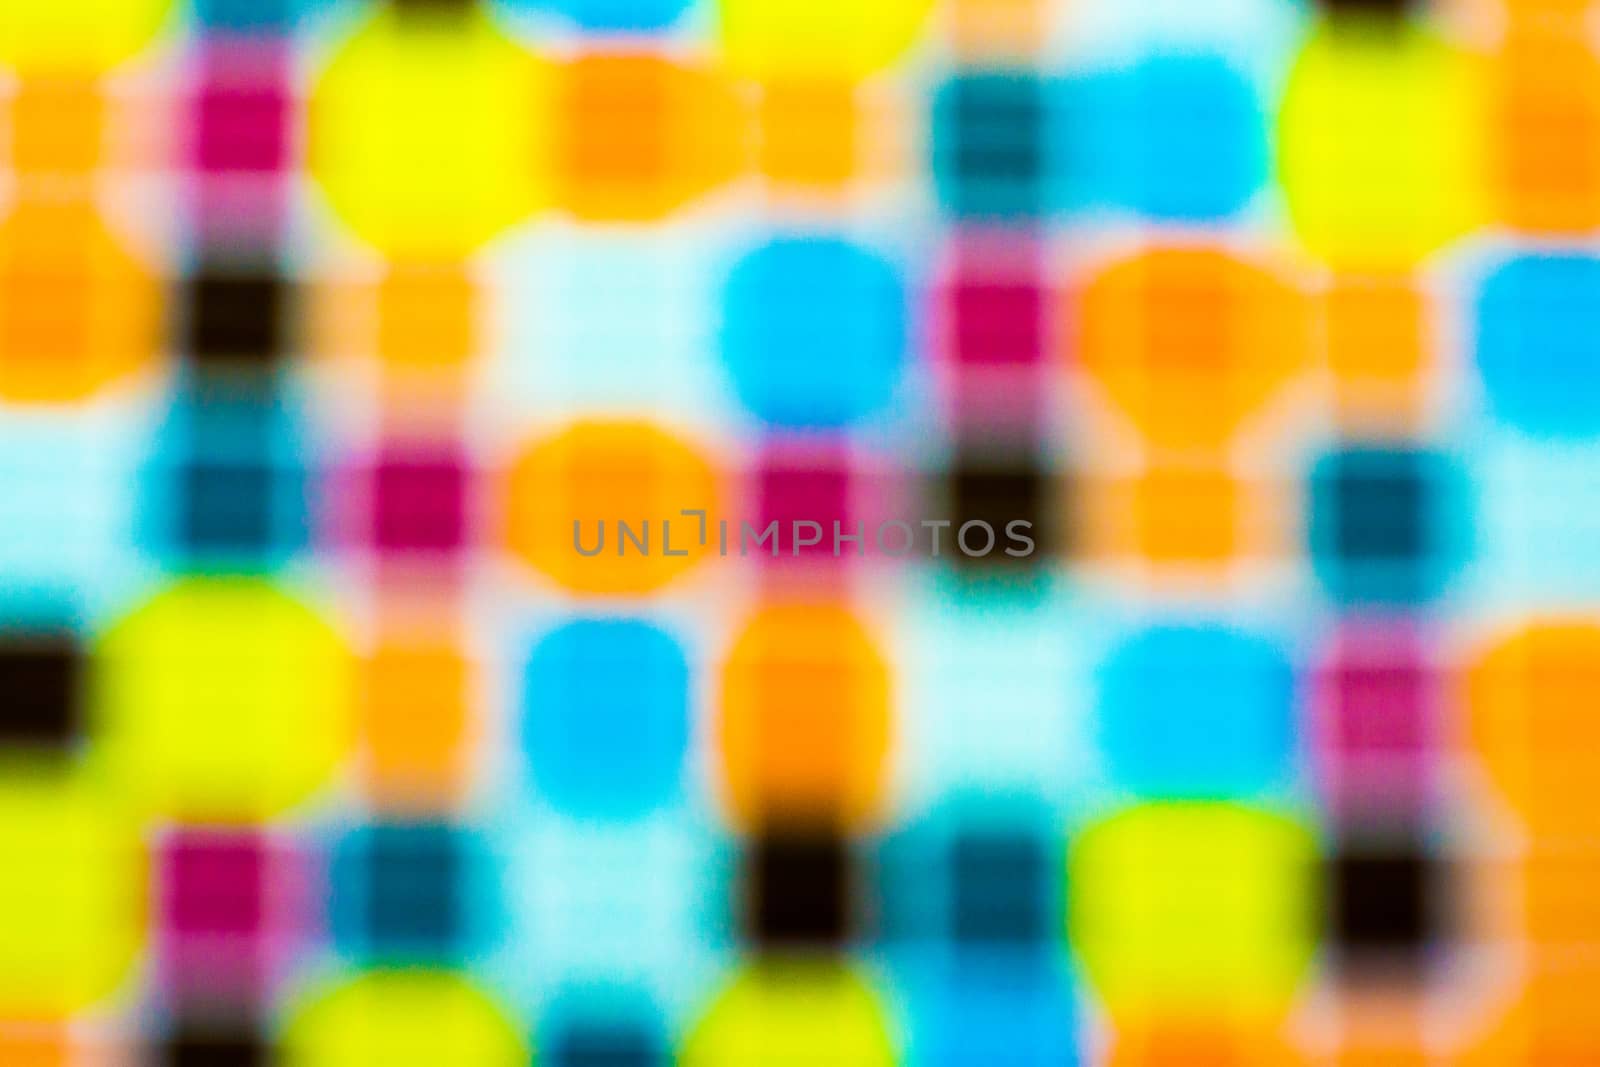 non specific pattern of colorful dots and squares on various color of background